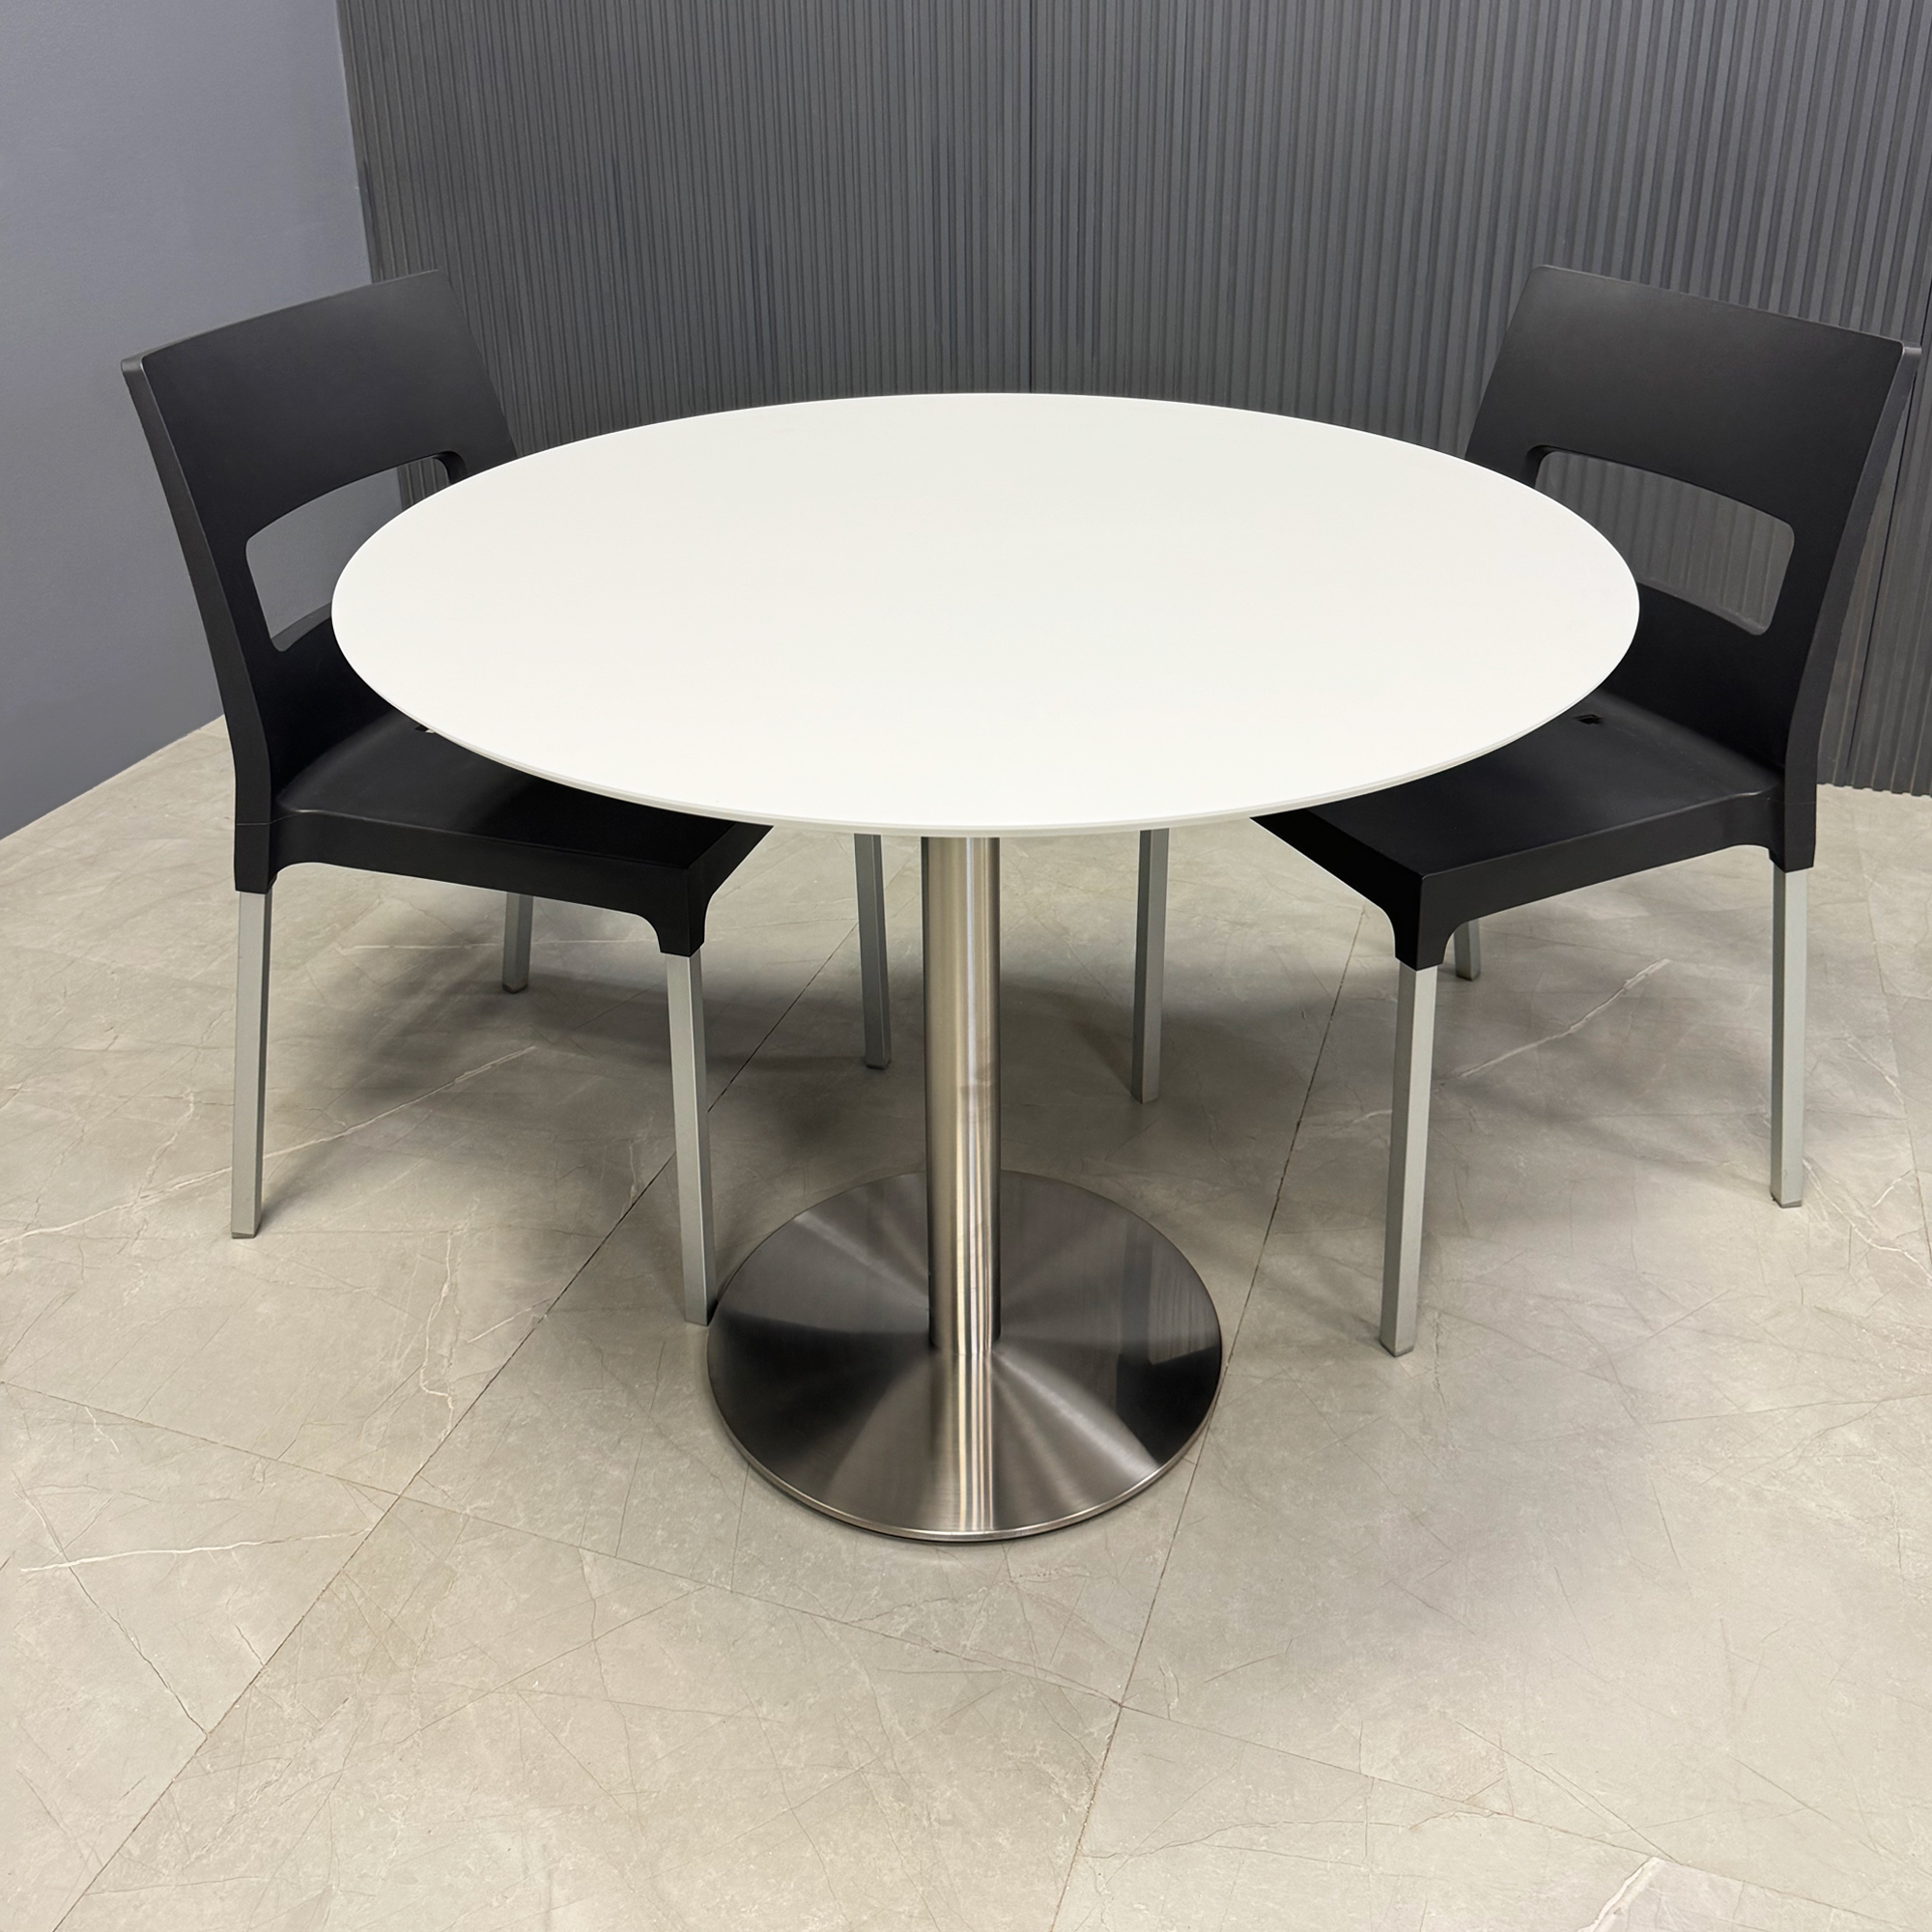 36-inch California Round Conference/Cafeteria Table with 1/2